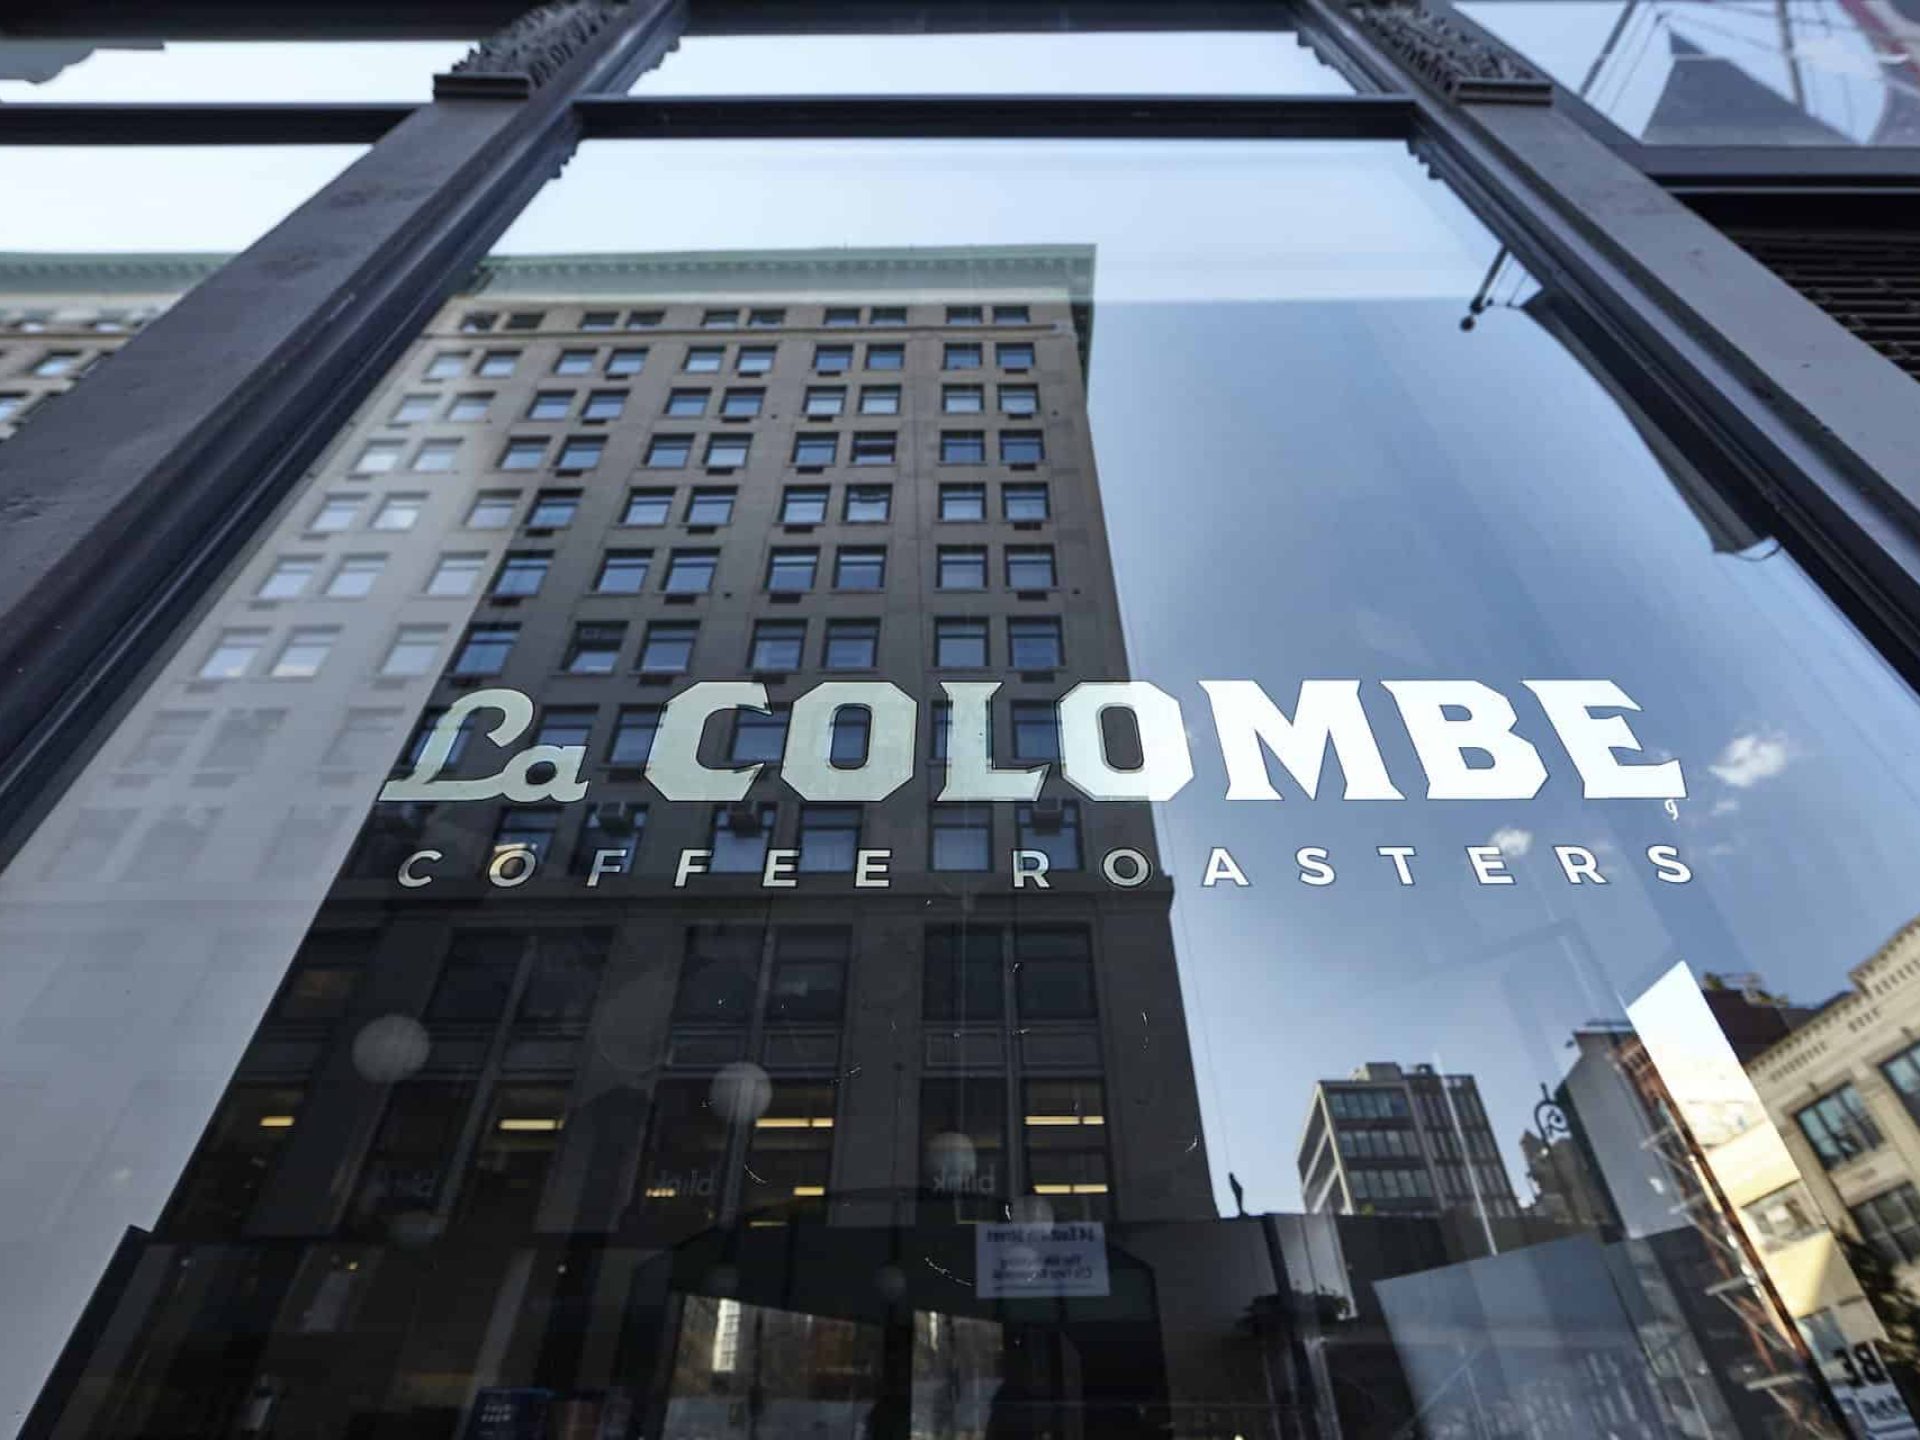 Close up of tall window with decal for "La Colombe Coffee Roasters" in white text with black border.